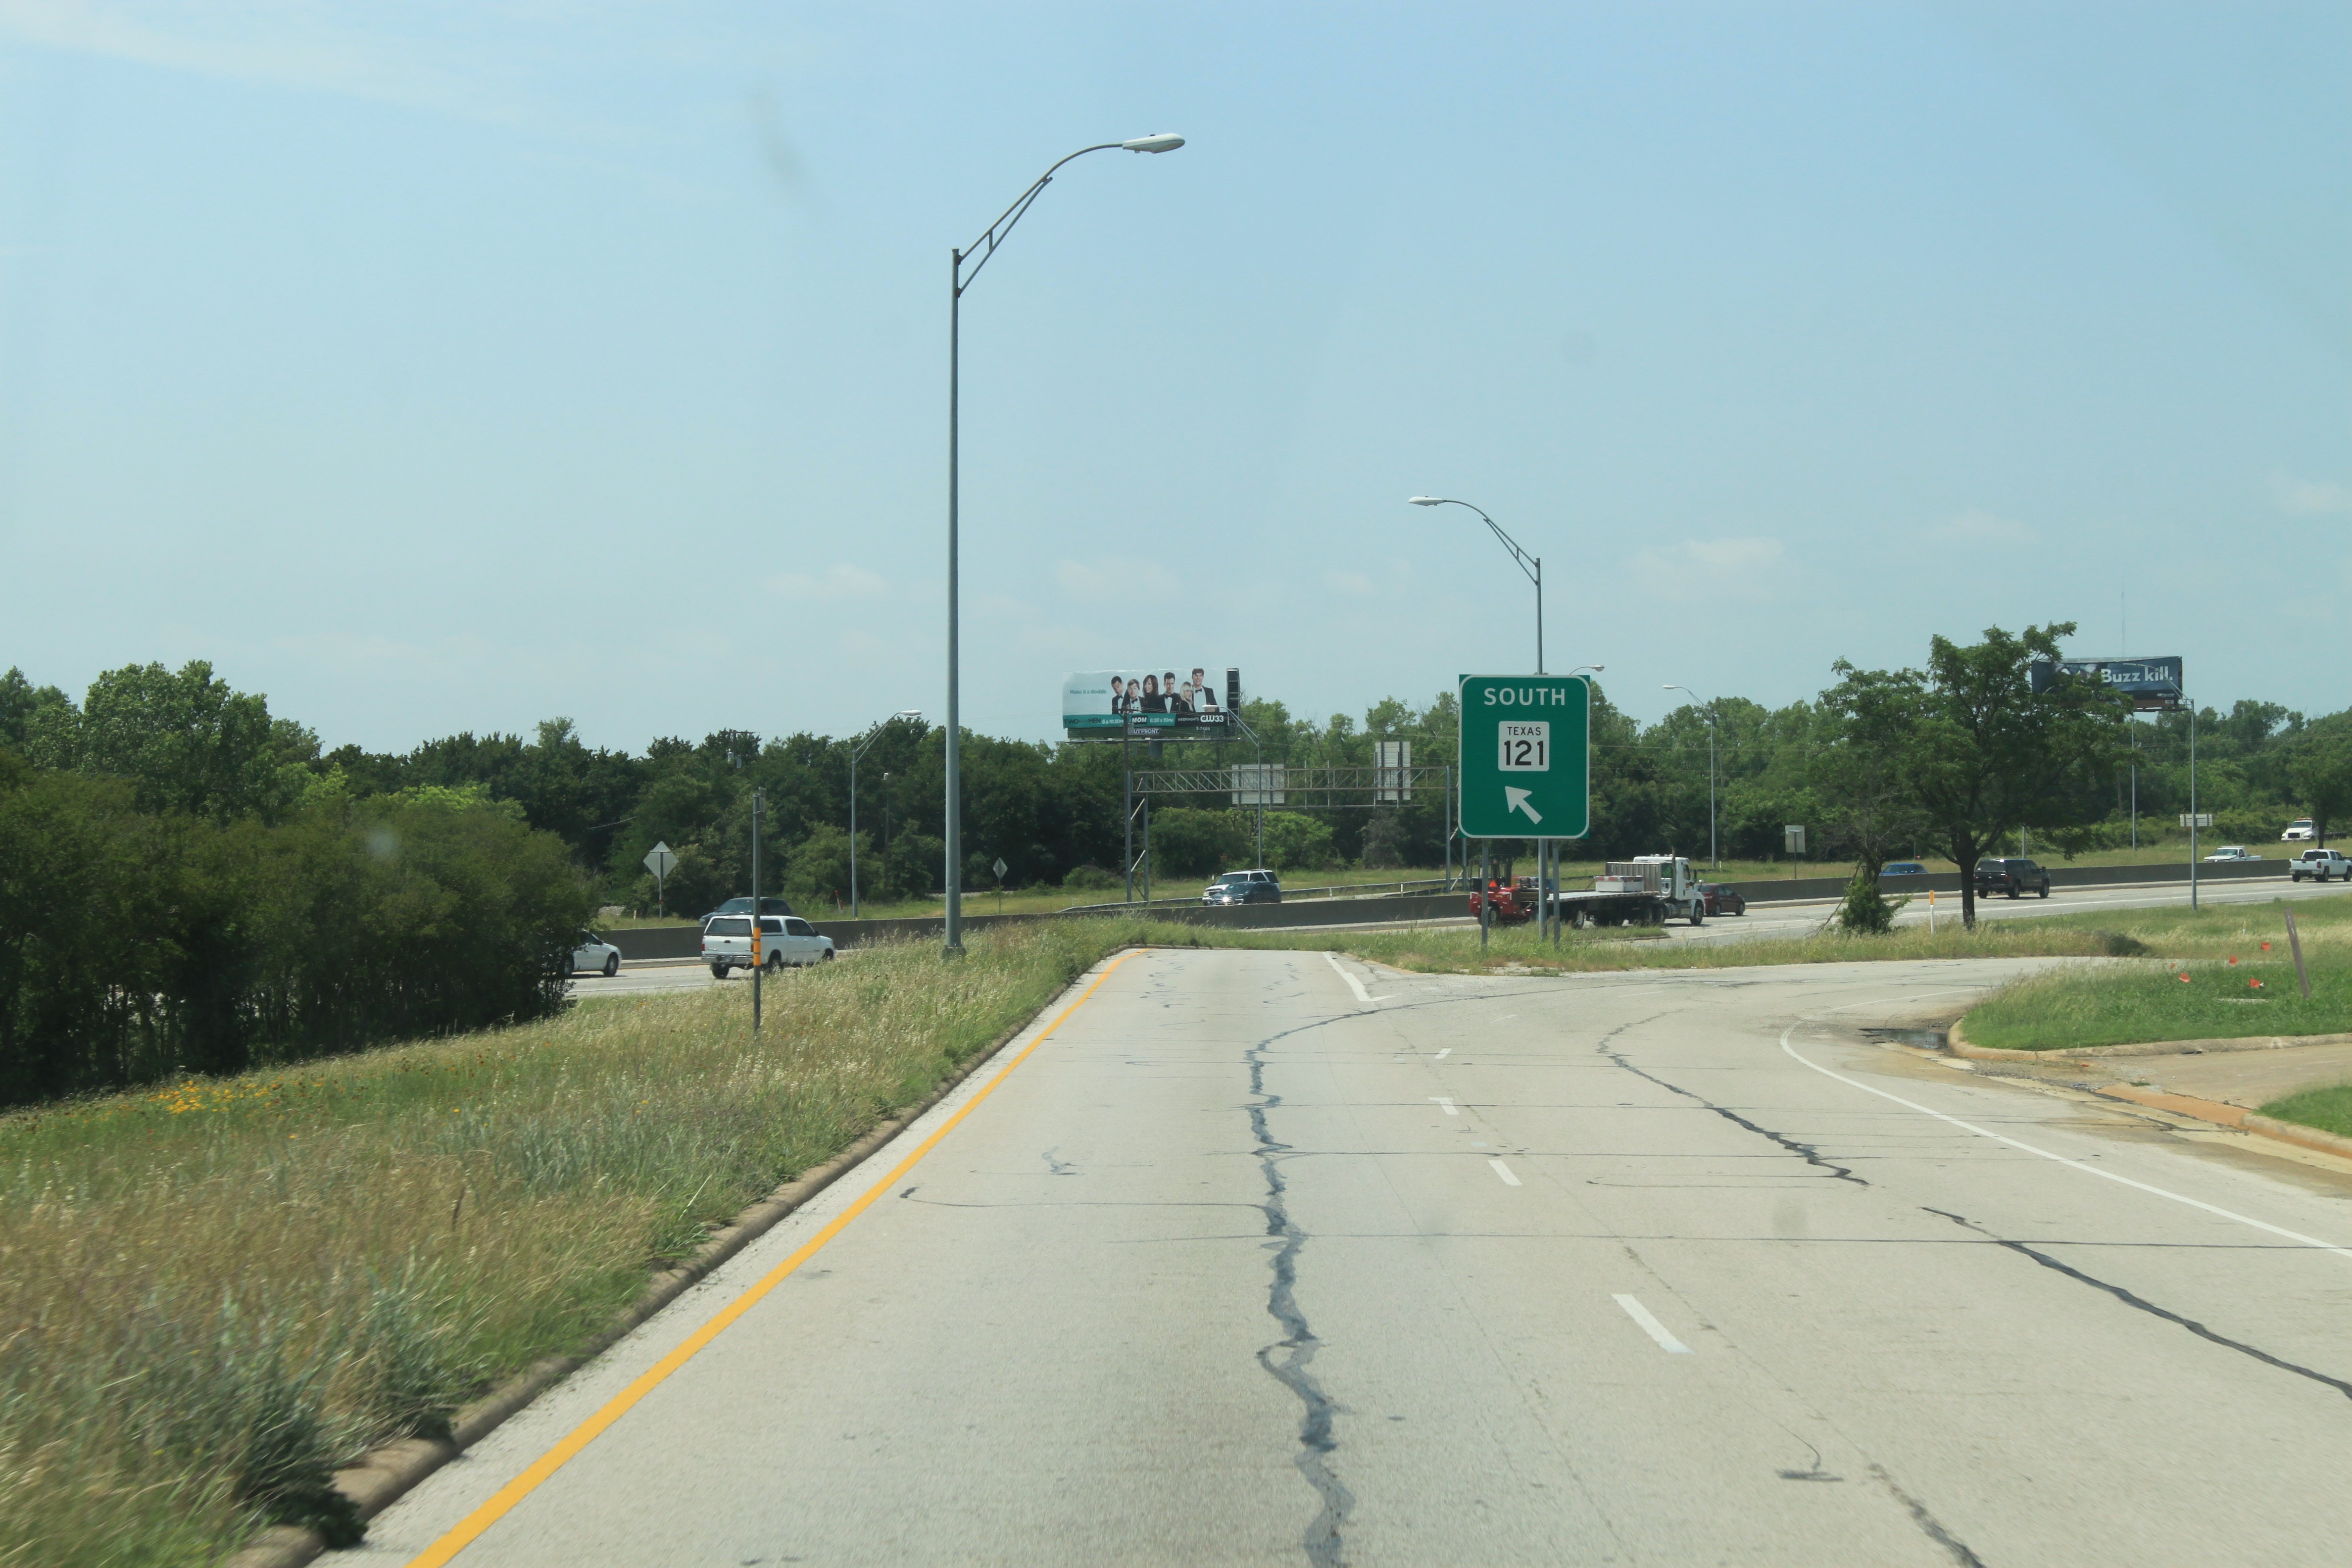 SH 121 southbound frontage road north of Handley Ederville Rd showing entrance ramp to highway.